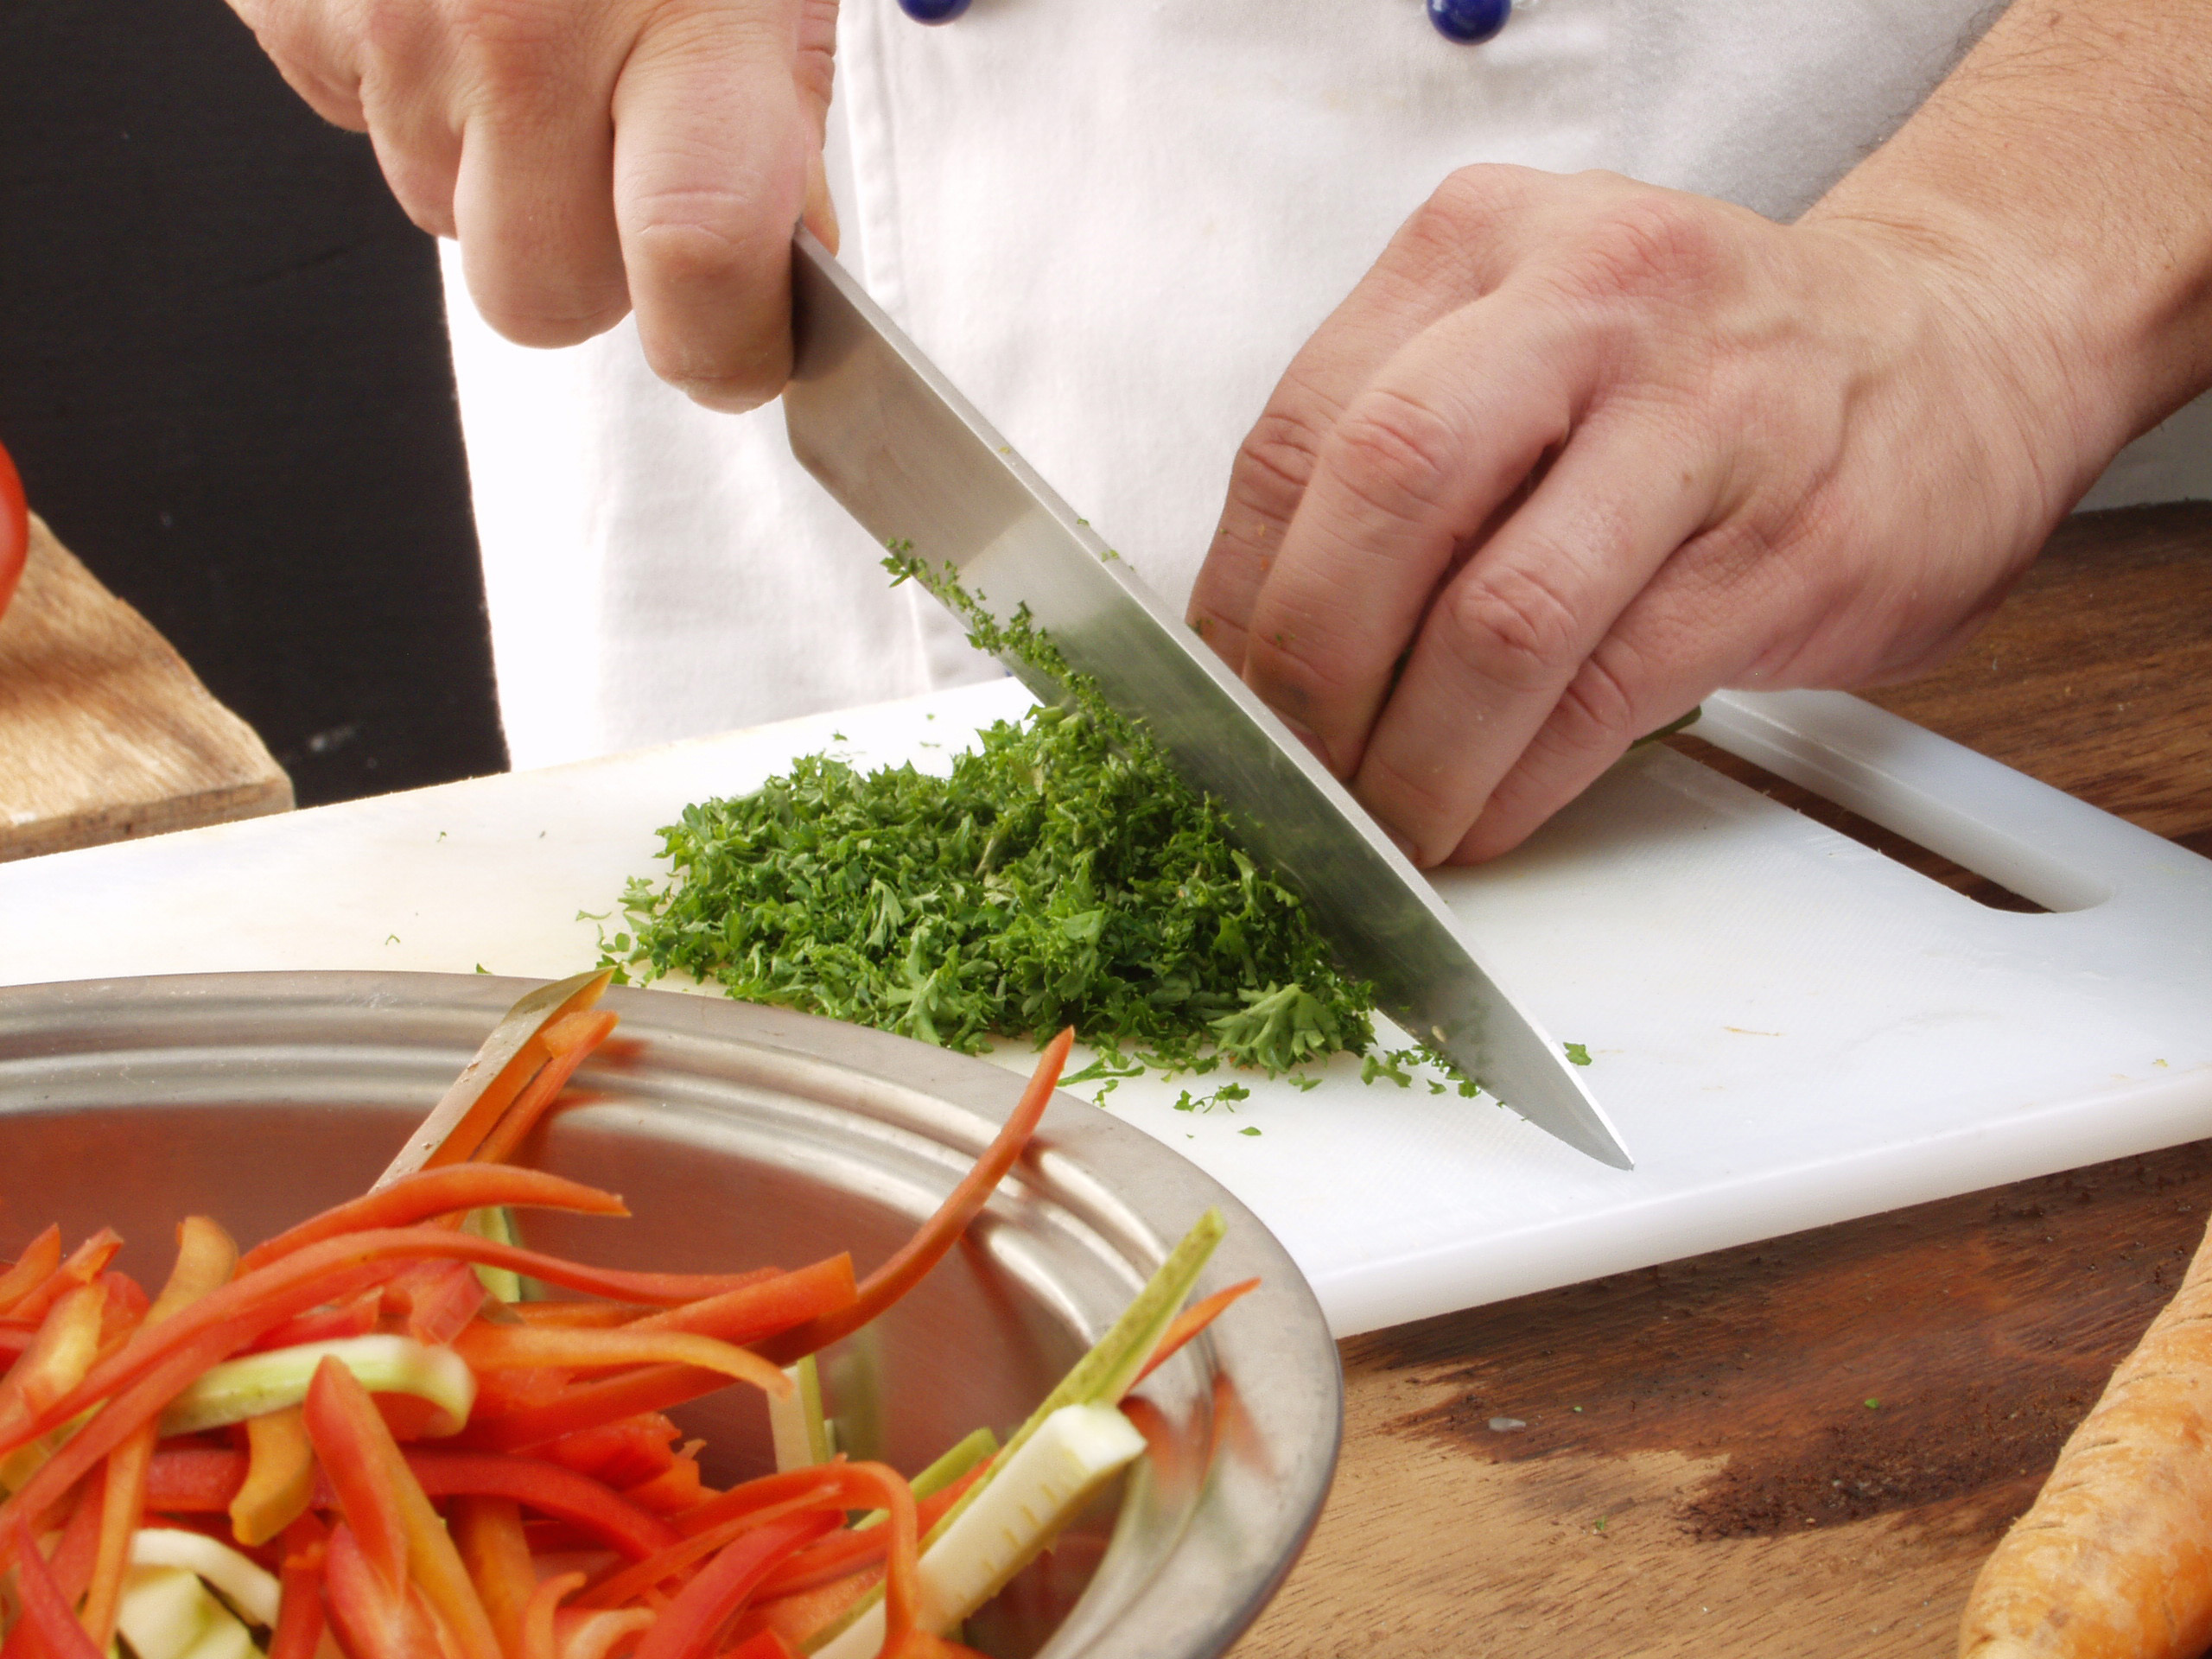 A chef chopping parsley using a large kitchen knife